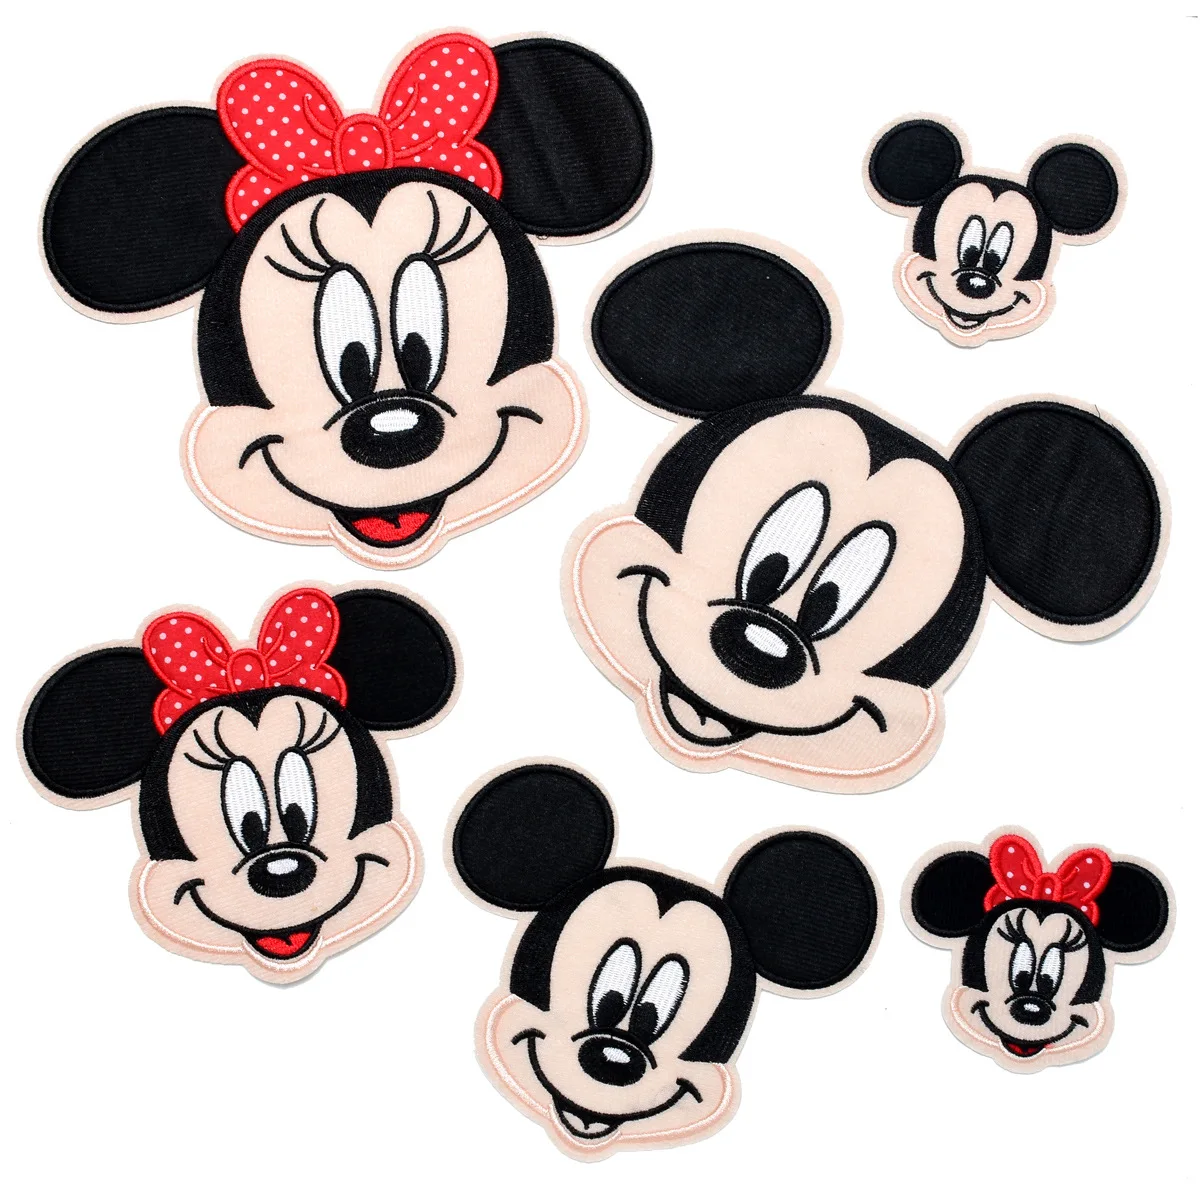 Cartoon Mickey Minnie Mouse Avatar Cloth Paste Minnie Couple Clothes Decoration Iron On Patches Embroidery Patches For Clothing